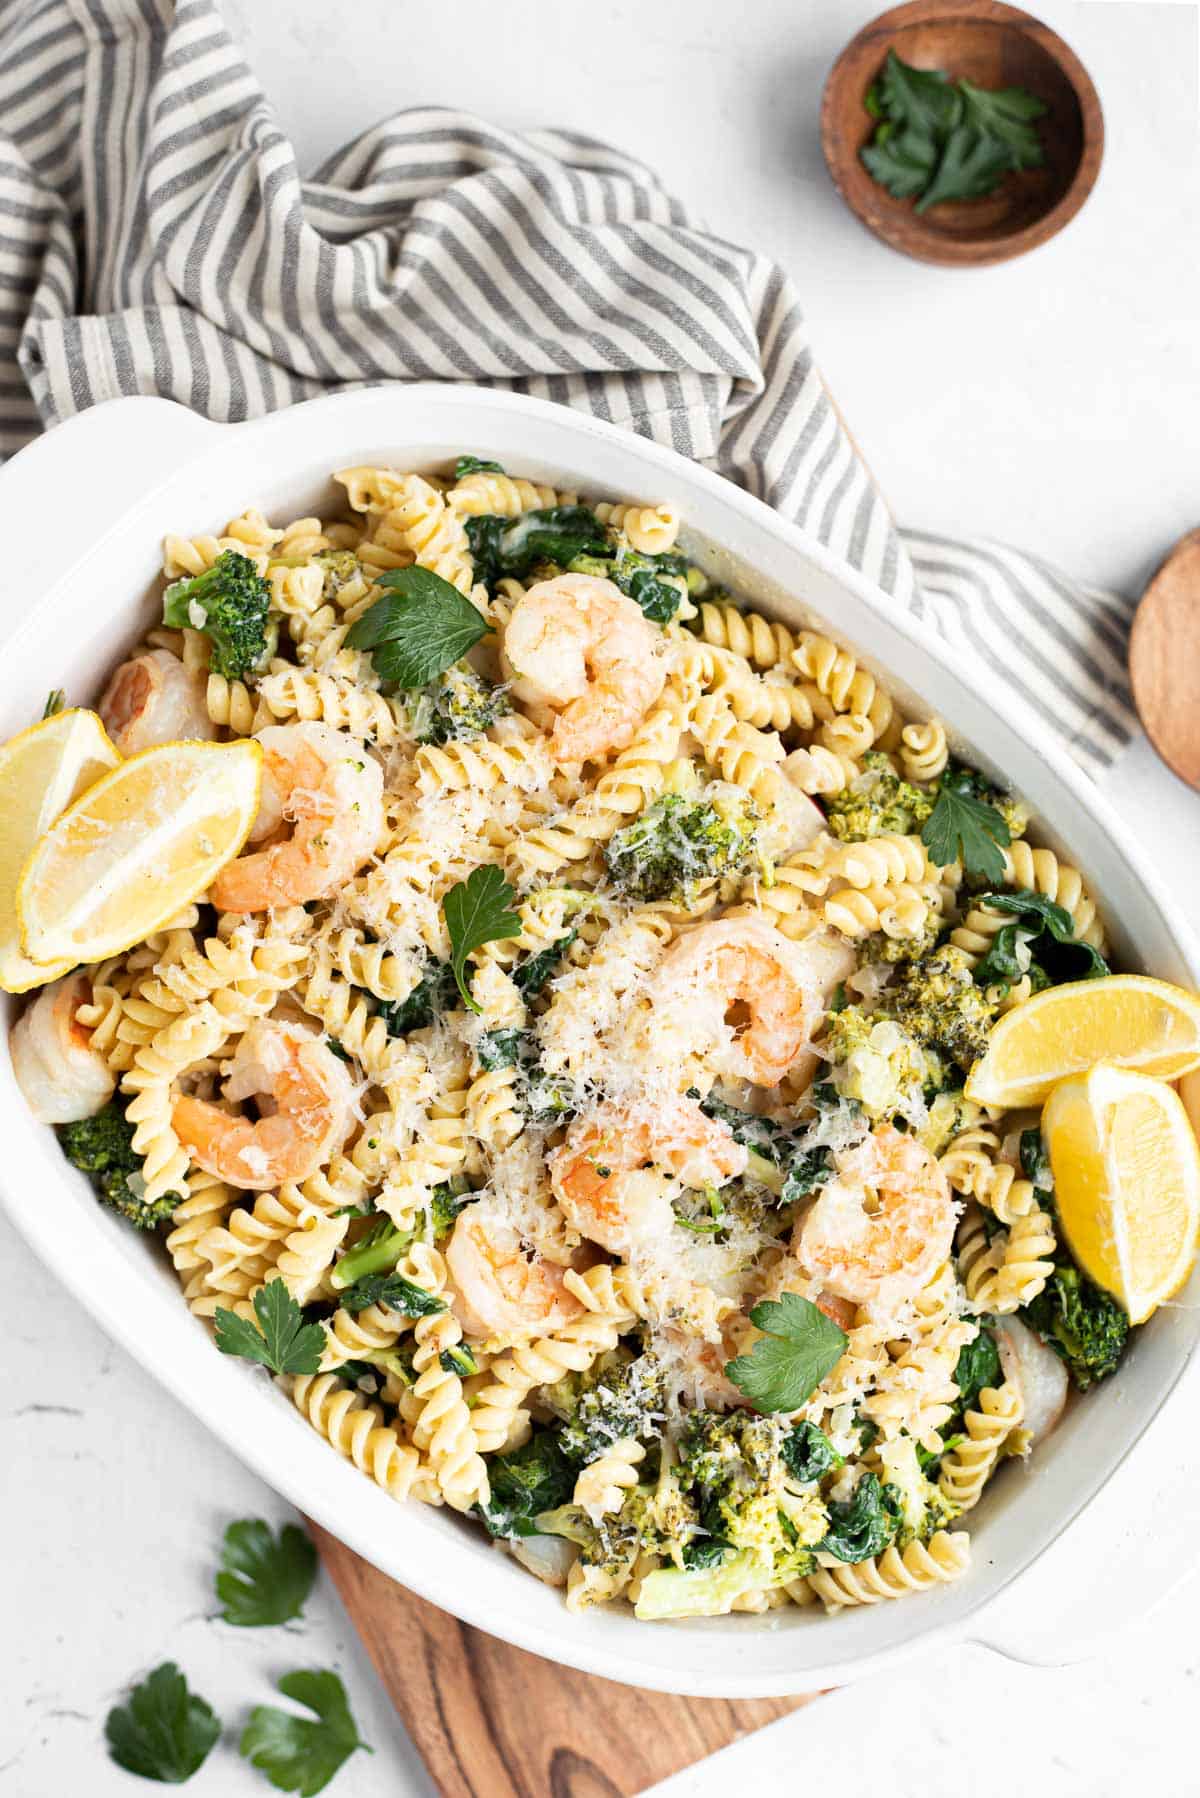 shrimp and broccoli pasta in a white serving dish with lemon wedges and stripped napkin.